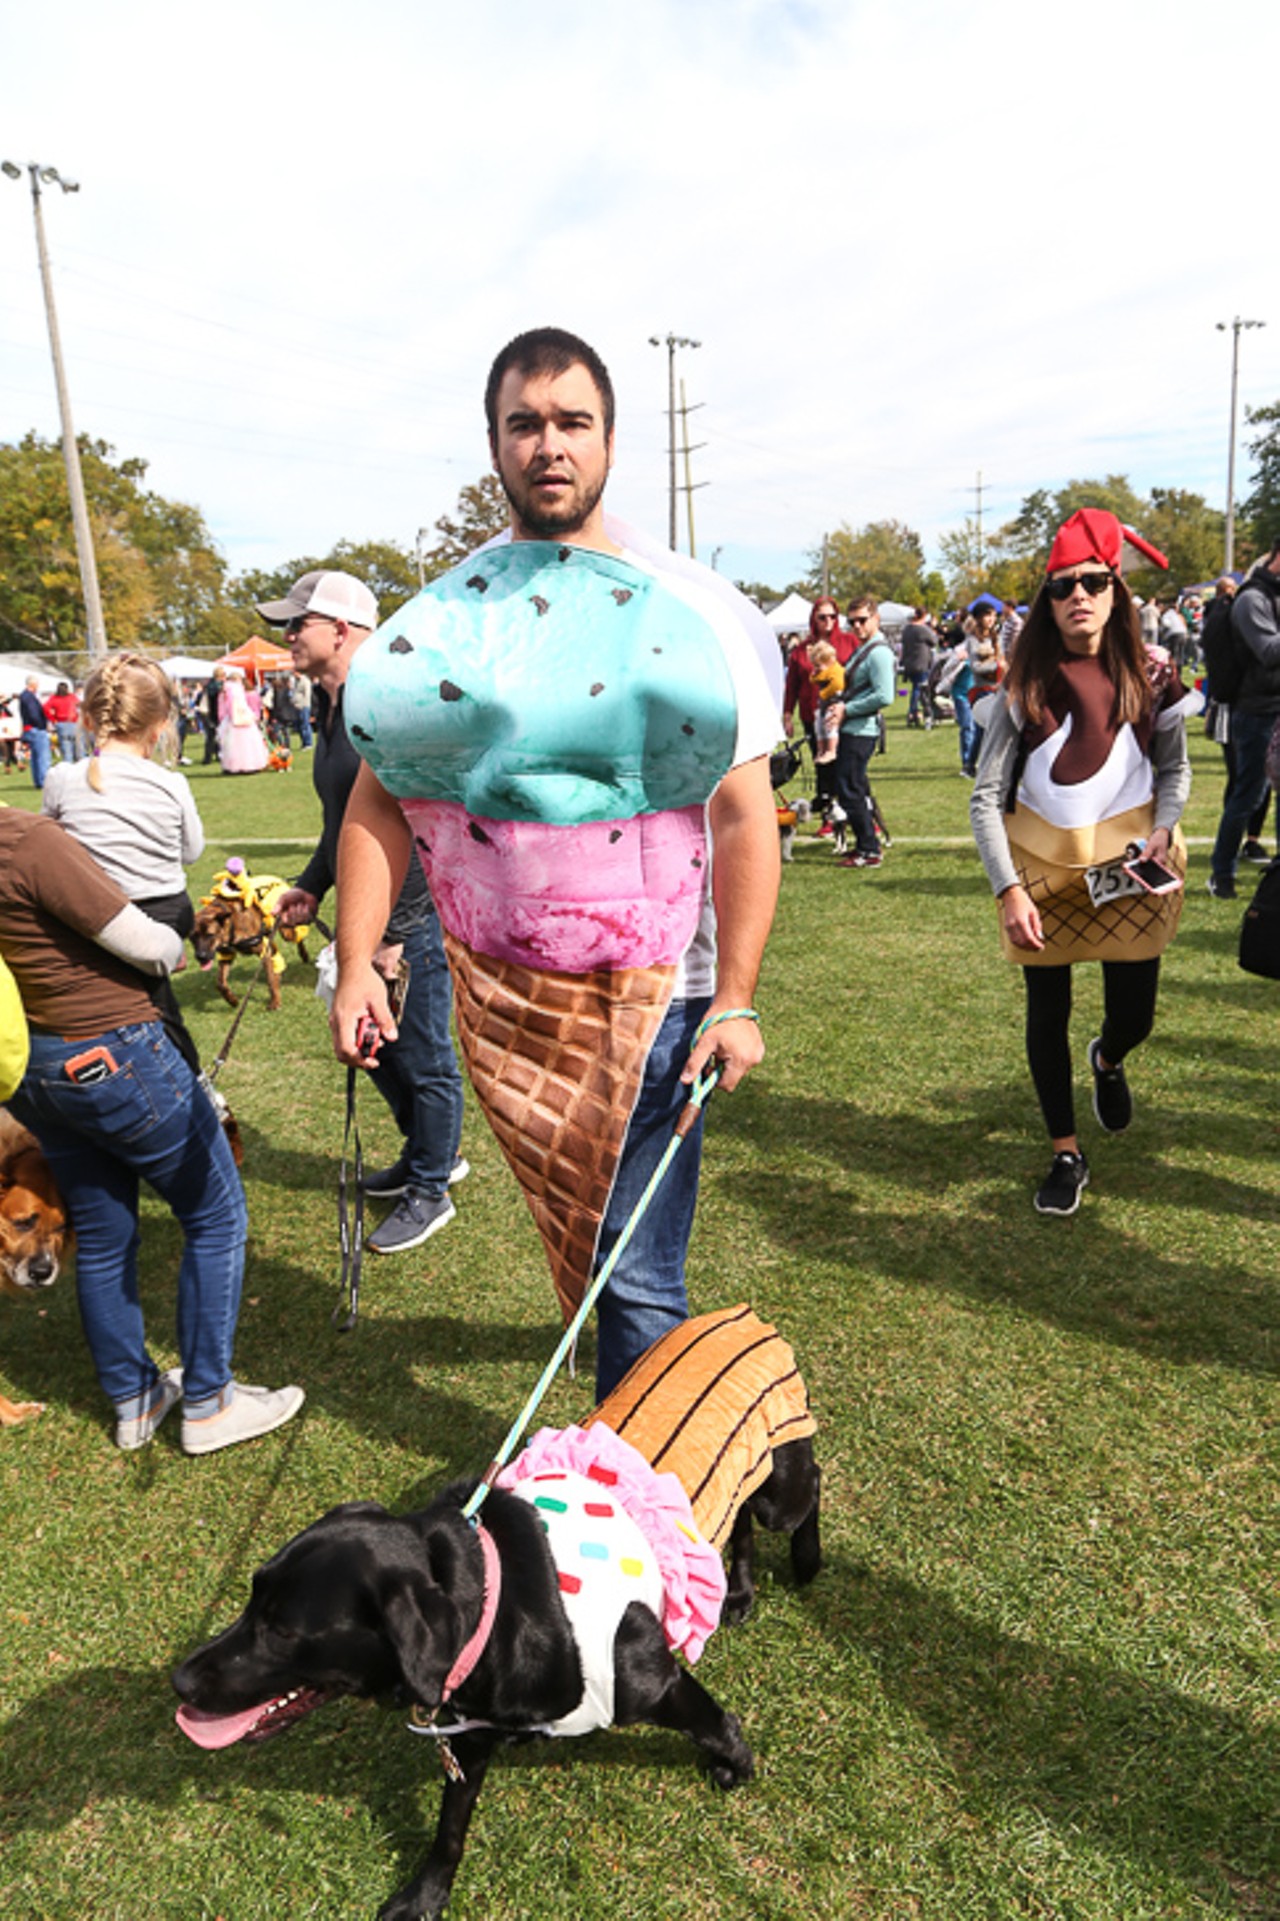 Everything We Saw at the 2019 Spooky Pooch Parade